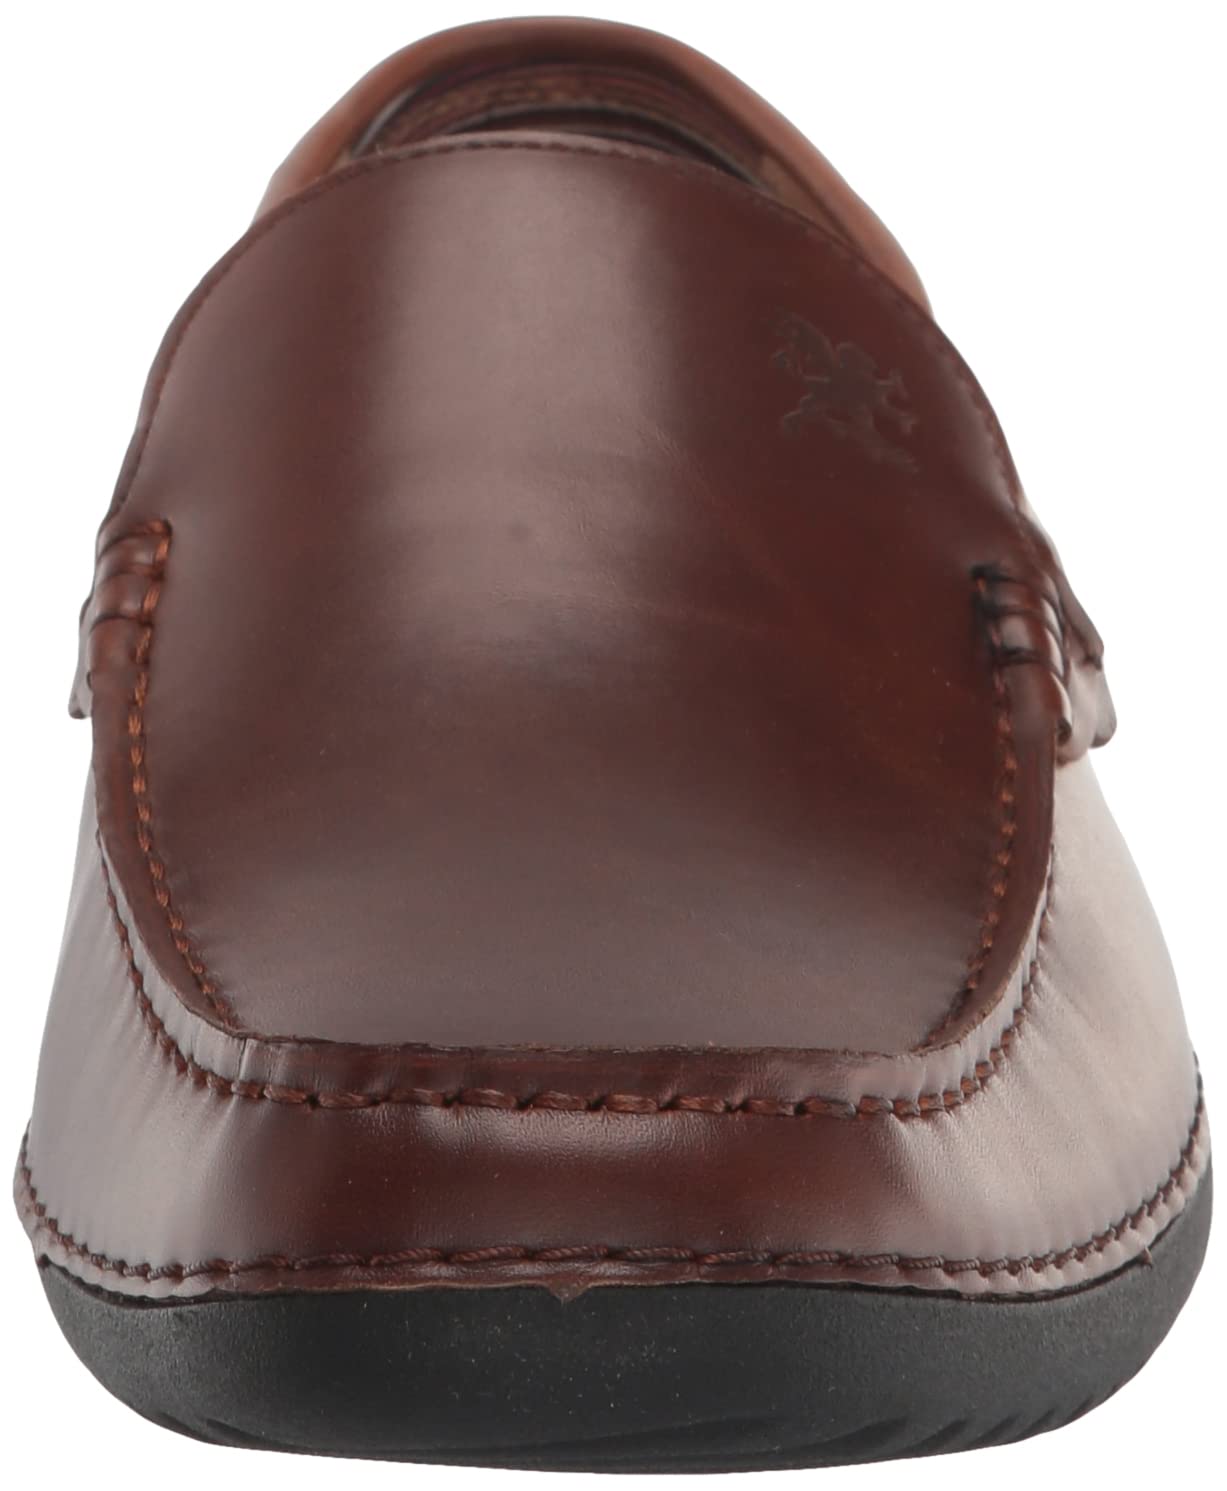 Stacy Adams Men's Del Slip On Driving Style Loafer, Brown, 14